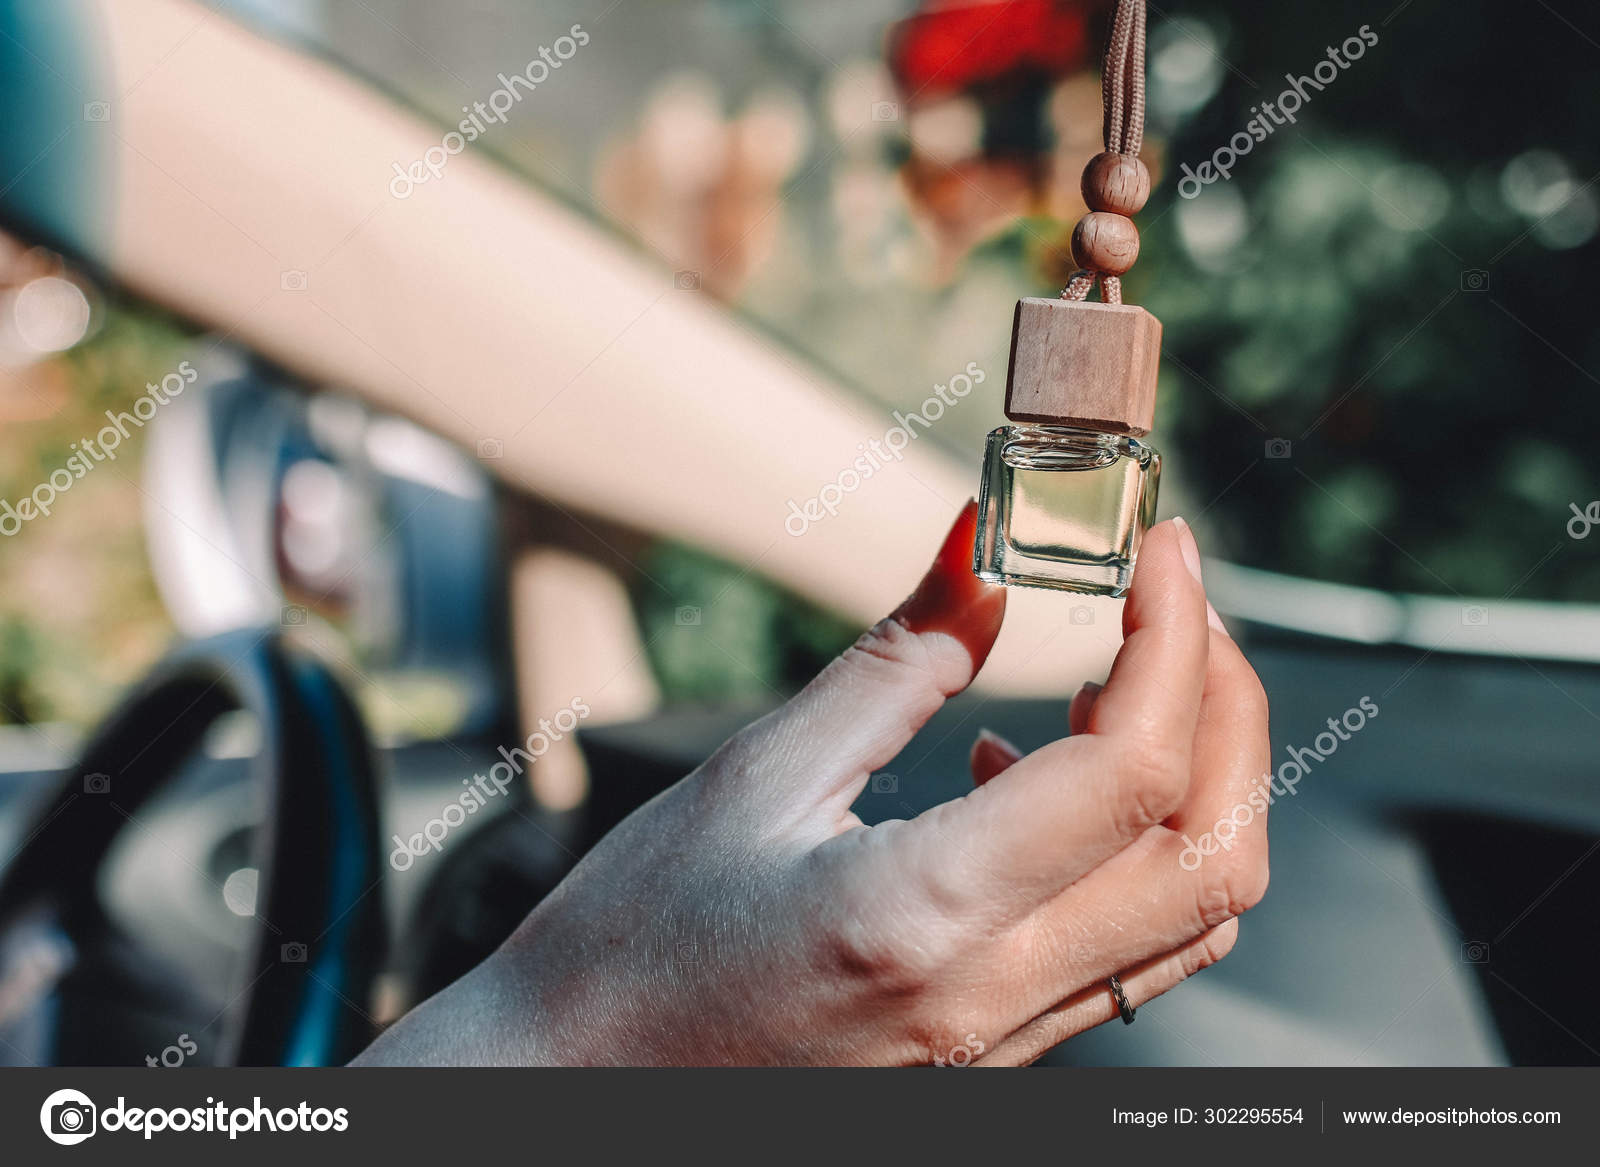 Small glass bottle with car perfume in female hand. Small glass